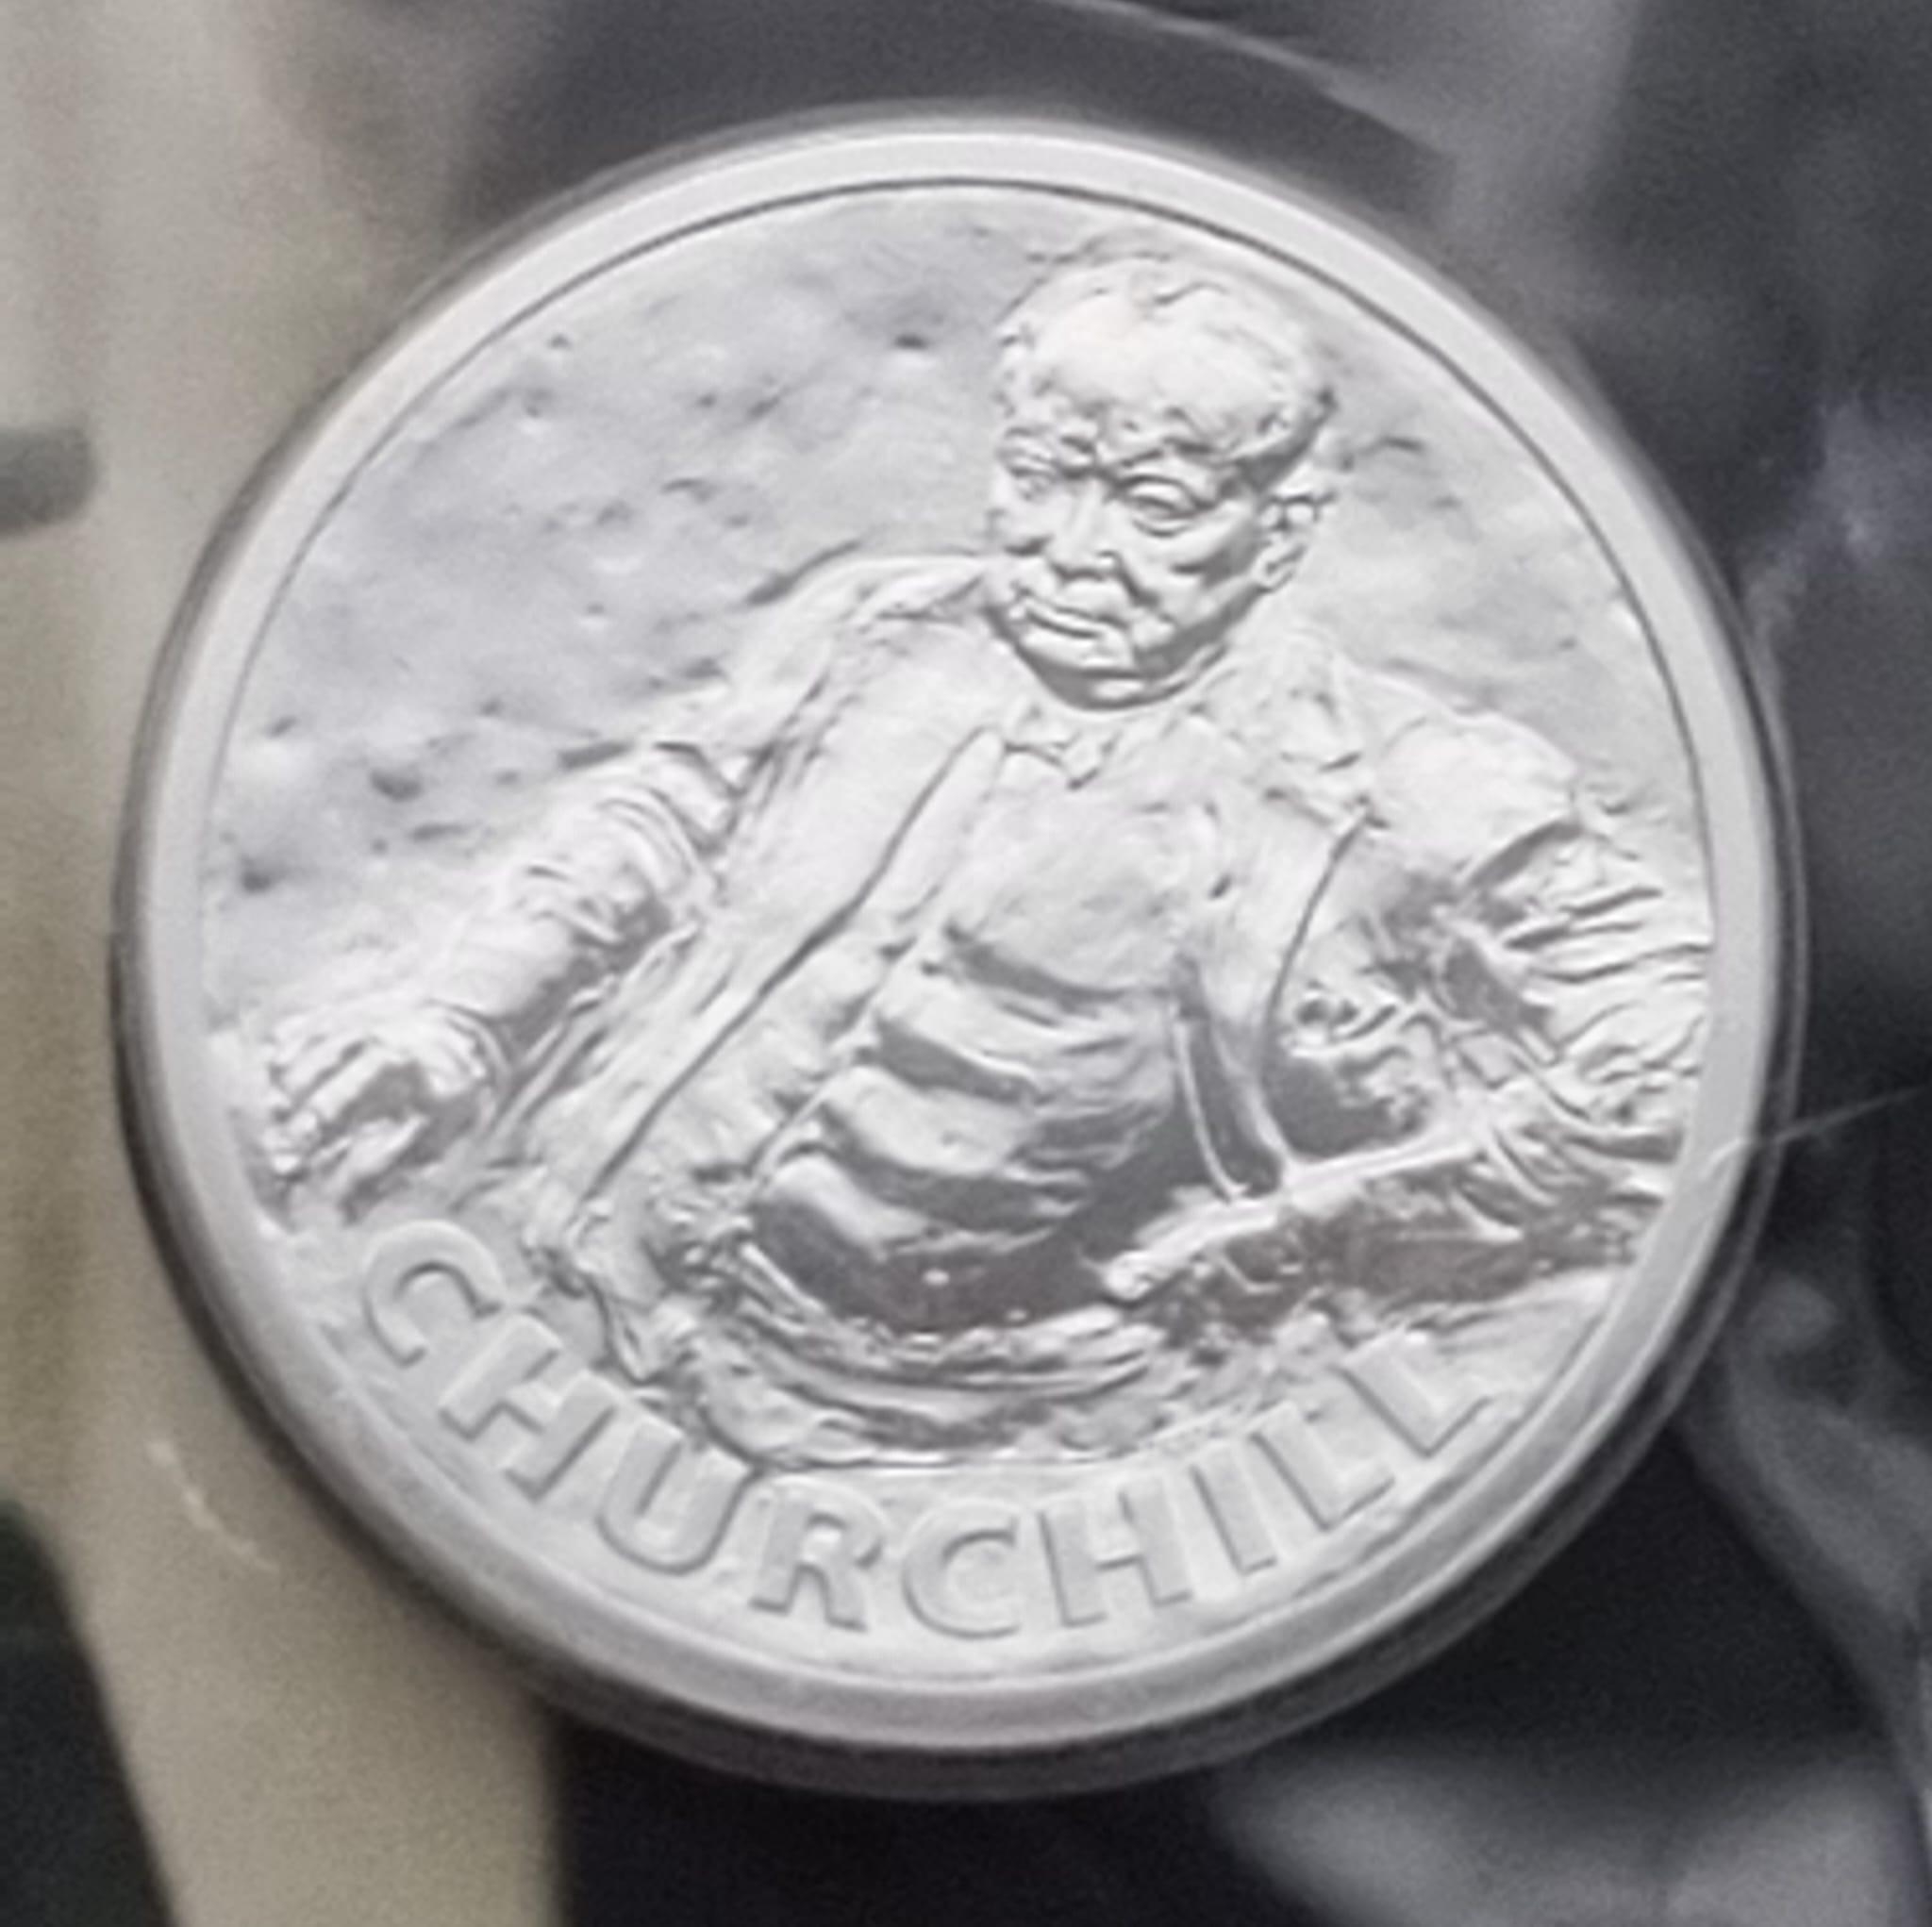 Mint Condition, Royal Mint ‘Sir Winston Churchill’ 2015 £20 Fine Silver Coin in unopened pack - Image 3 of 3